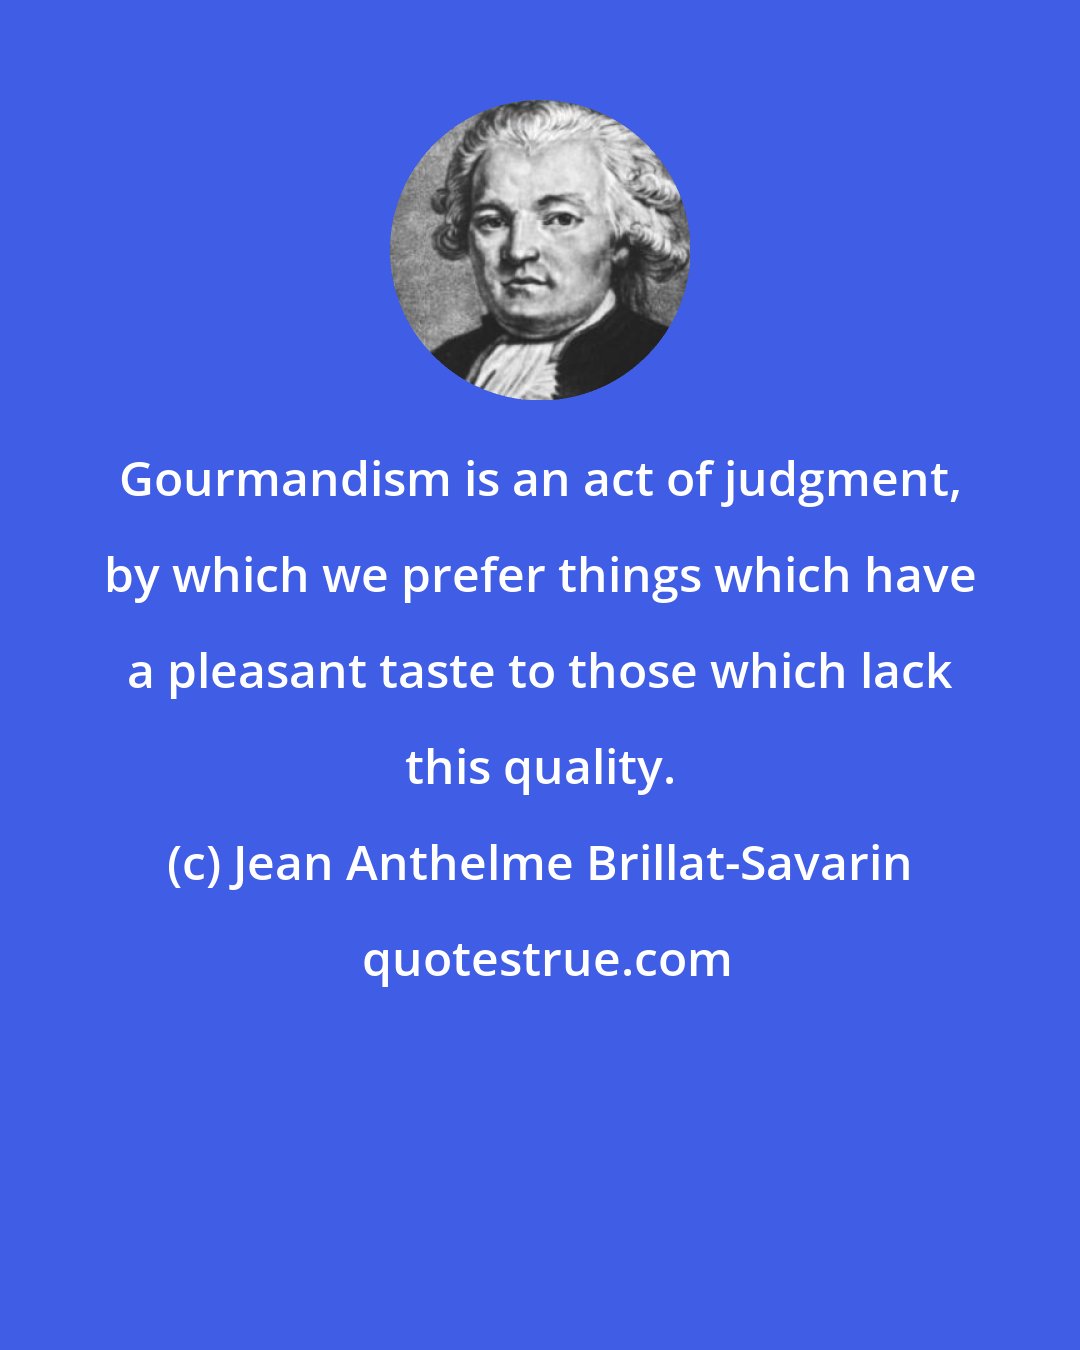 Jean Anthelme Brillat-Savarin: Gourmandism is an act of judgment, by which we prefer things which have a pleasant taste to those which lack this quality.